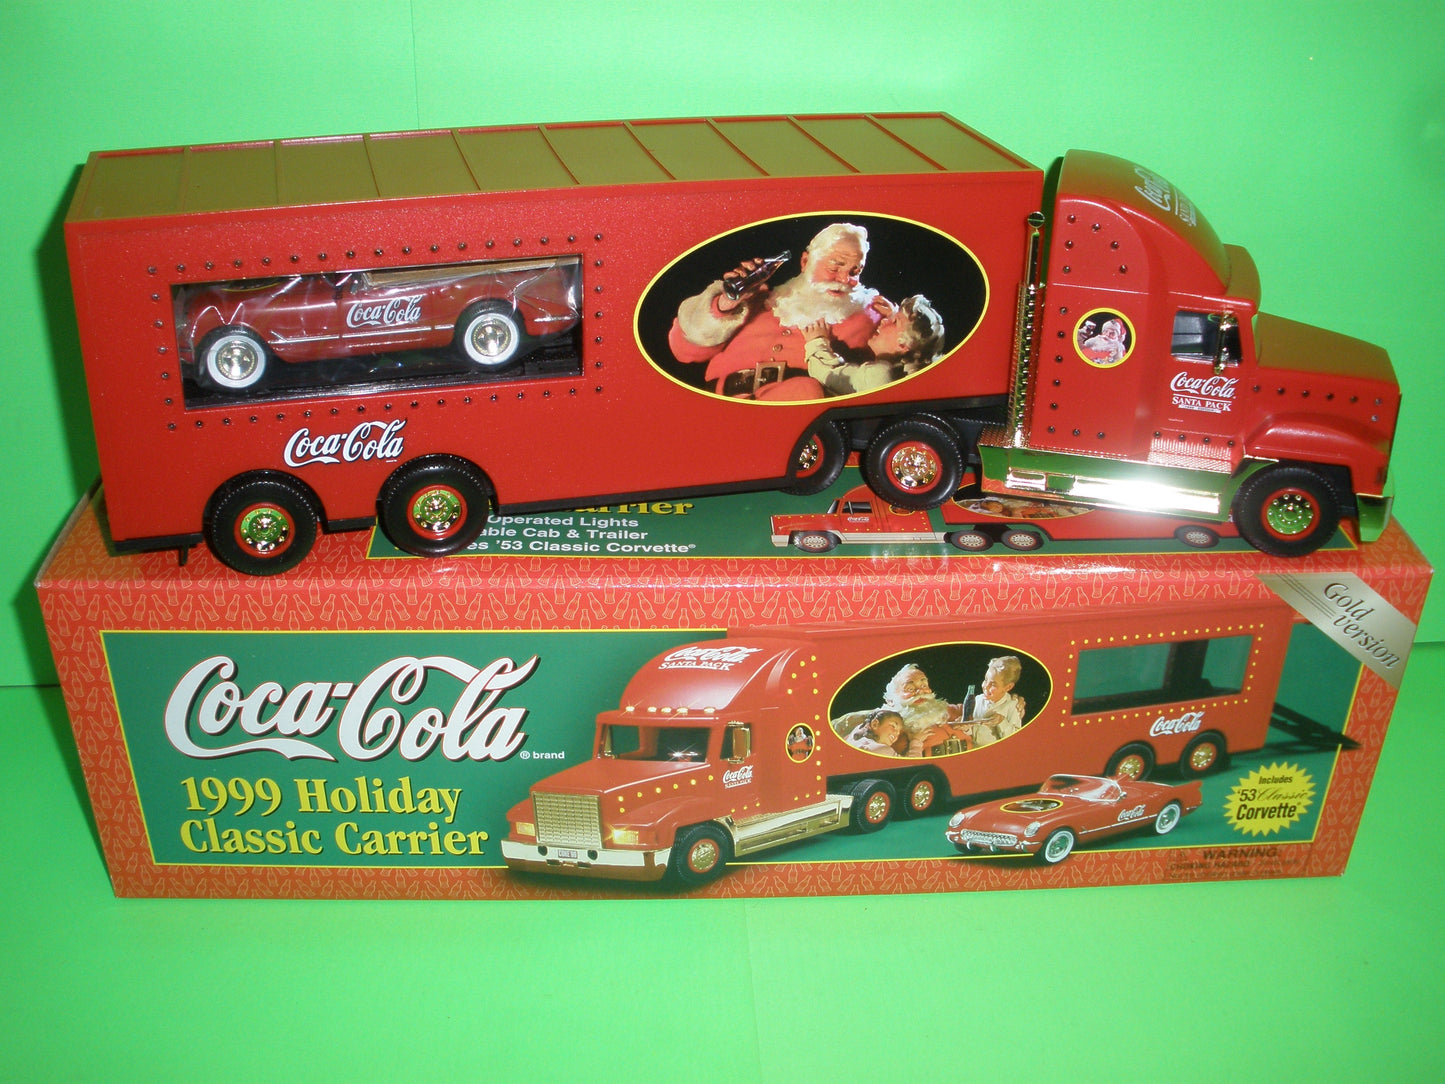 Coca-Cola 1999 Holiday Classic Car Carrier Truck - Gold Version